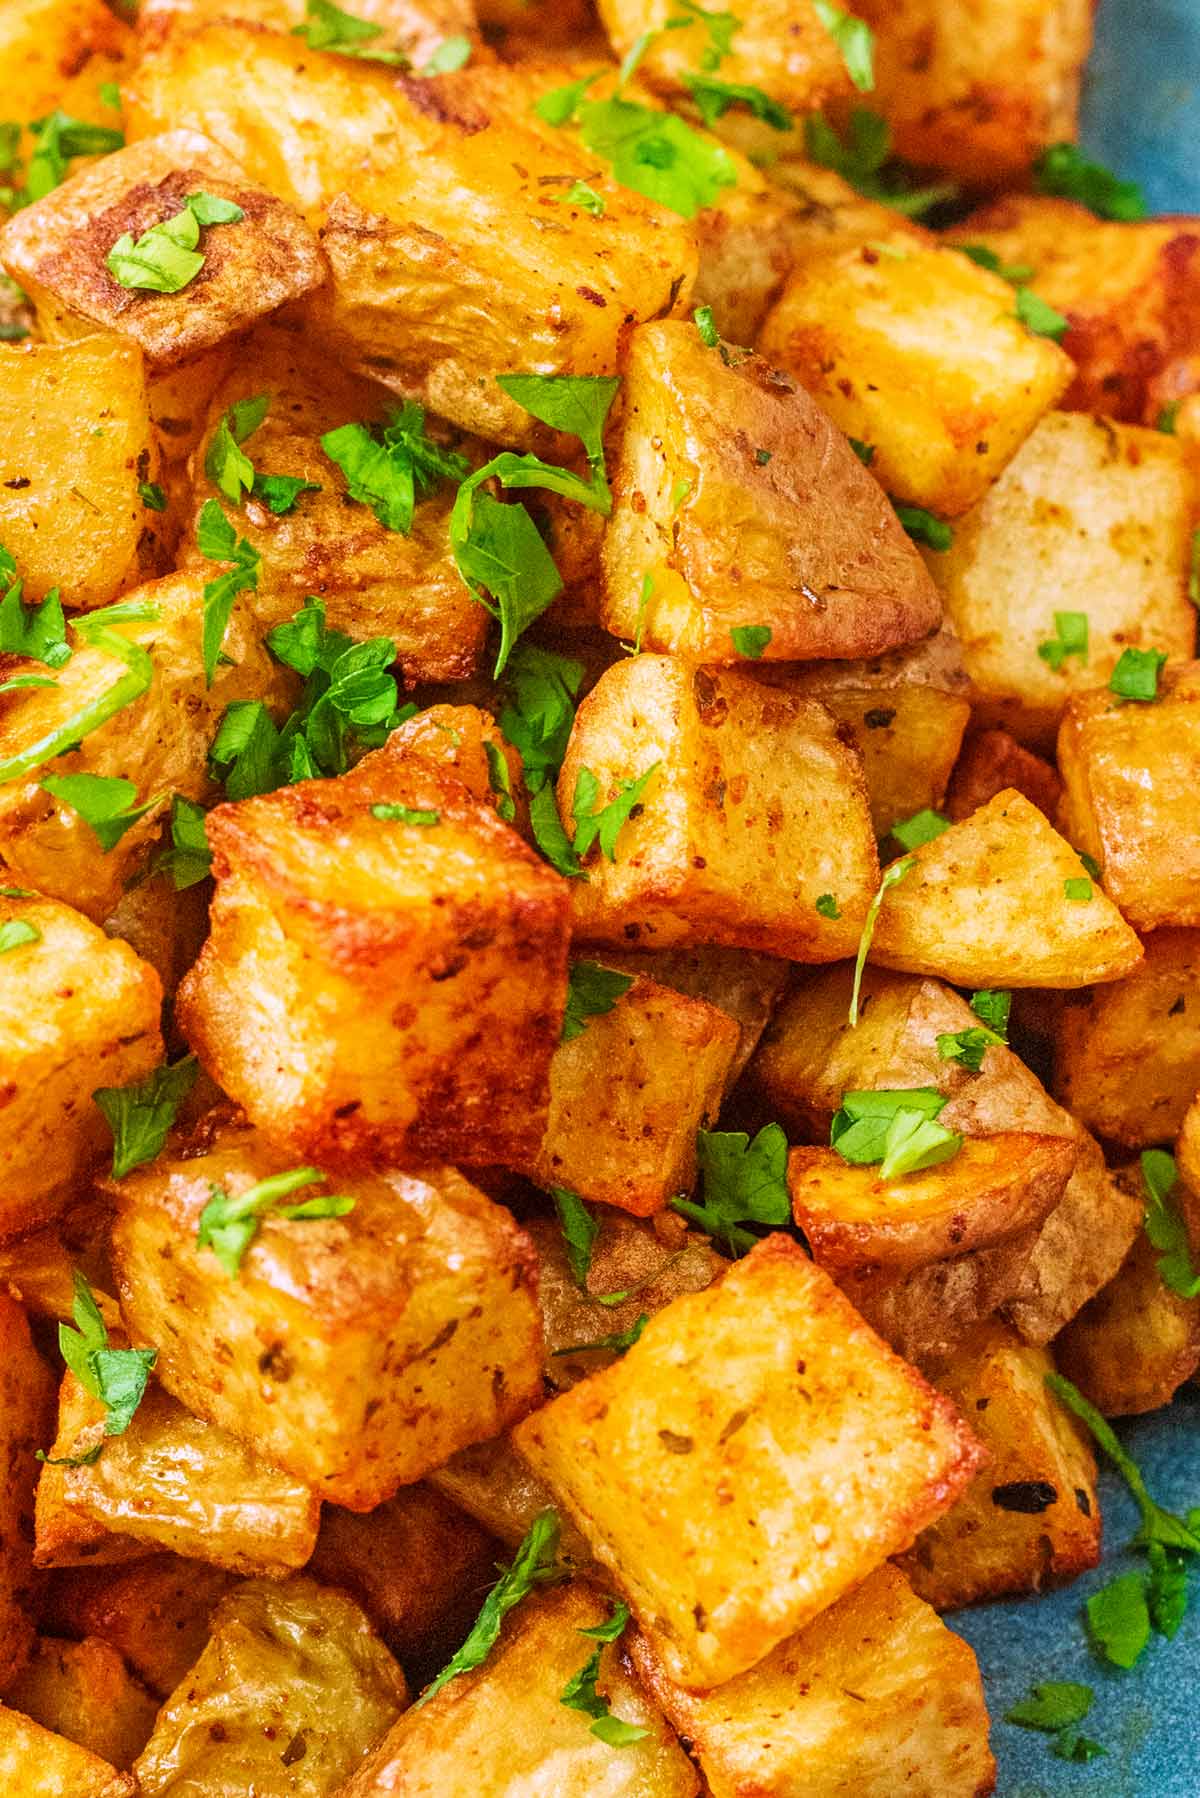 Cubes of cooked potato topped with chopped herbs.